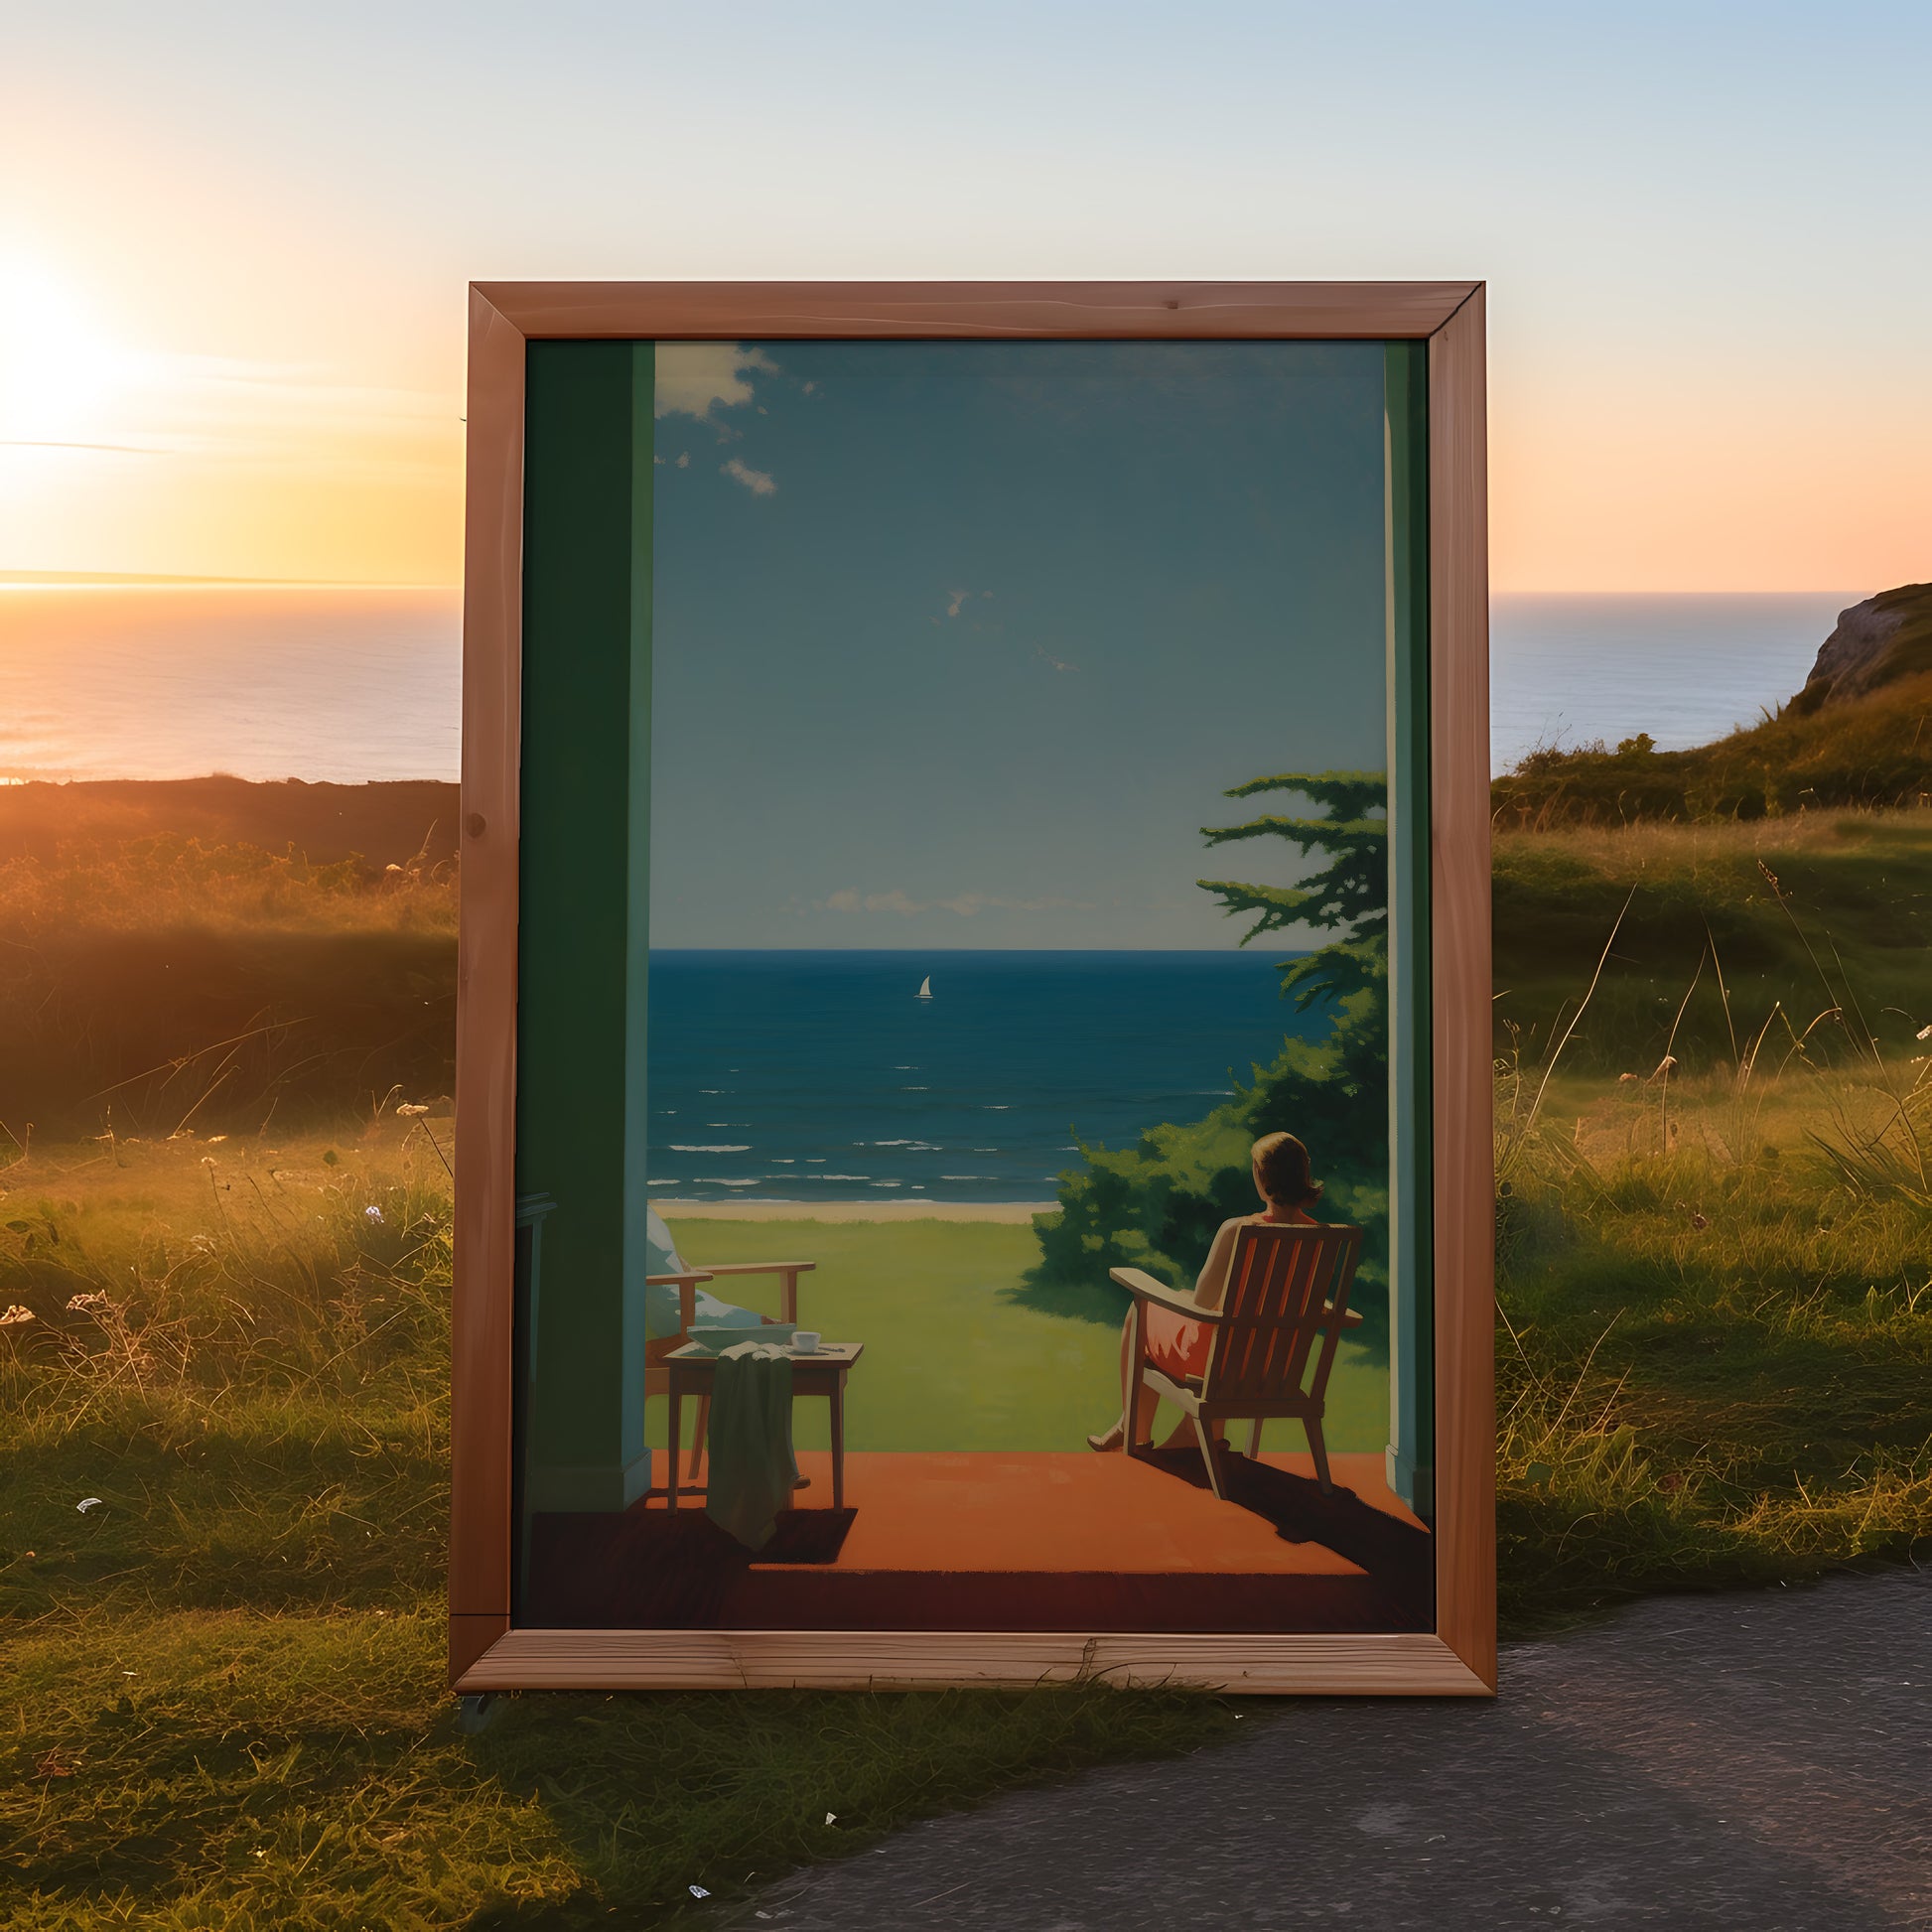 A painting of a person sitting on a chair by the sea, framed like a window against an outdoor backdrop.